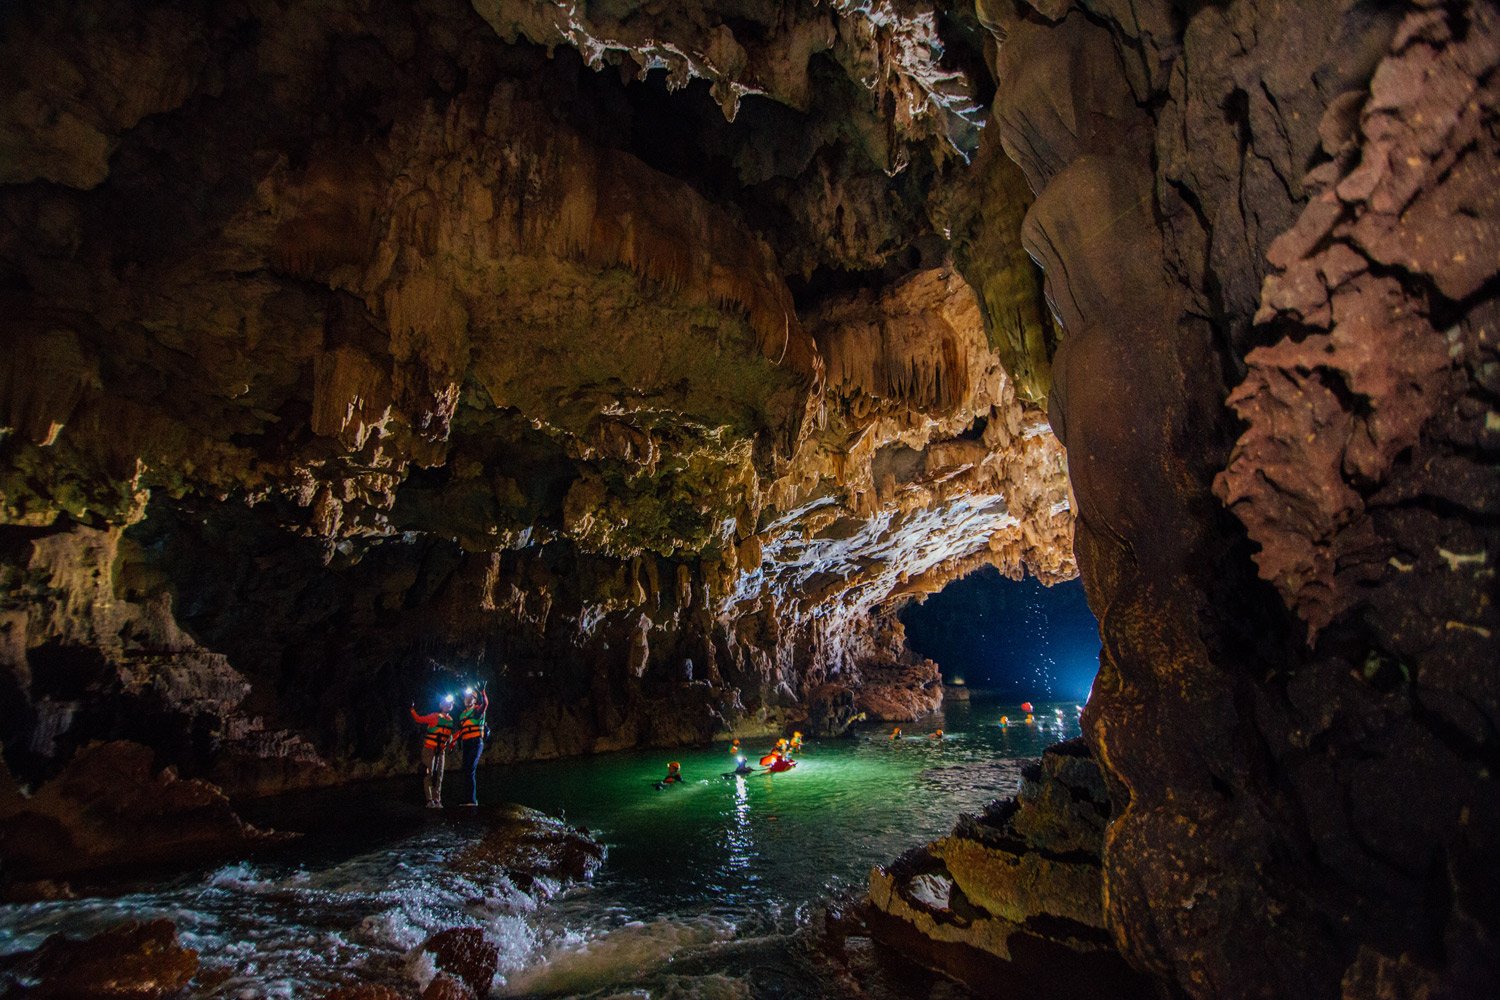 Swimming in an underground river is one of the very unique experiences of tours in Tu Lan.